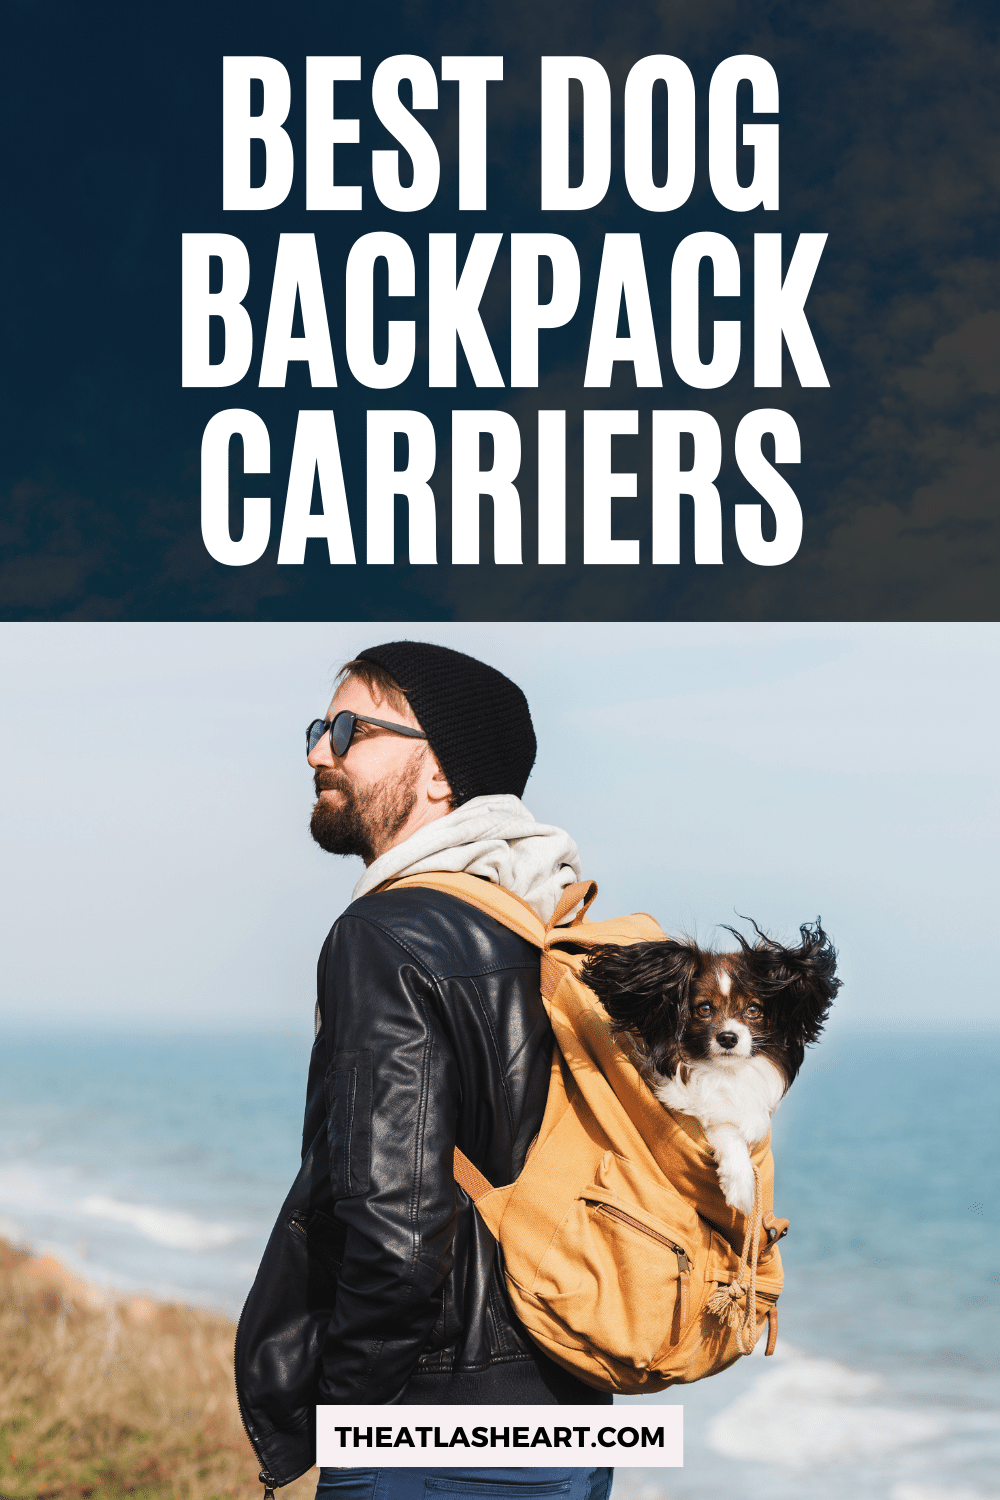 12 Best Dog Backpack Carriers for Hiking in 2022